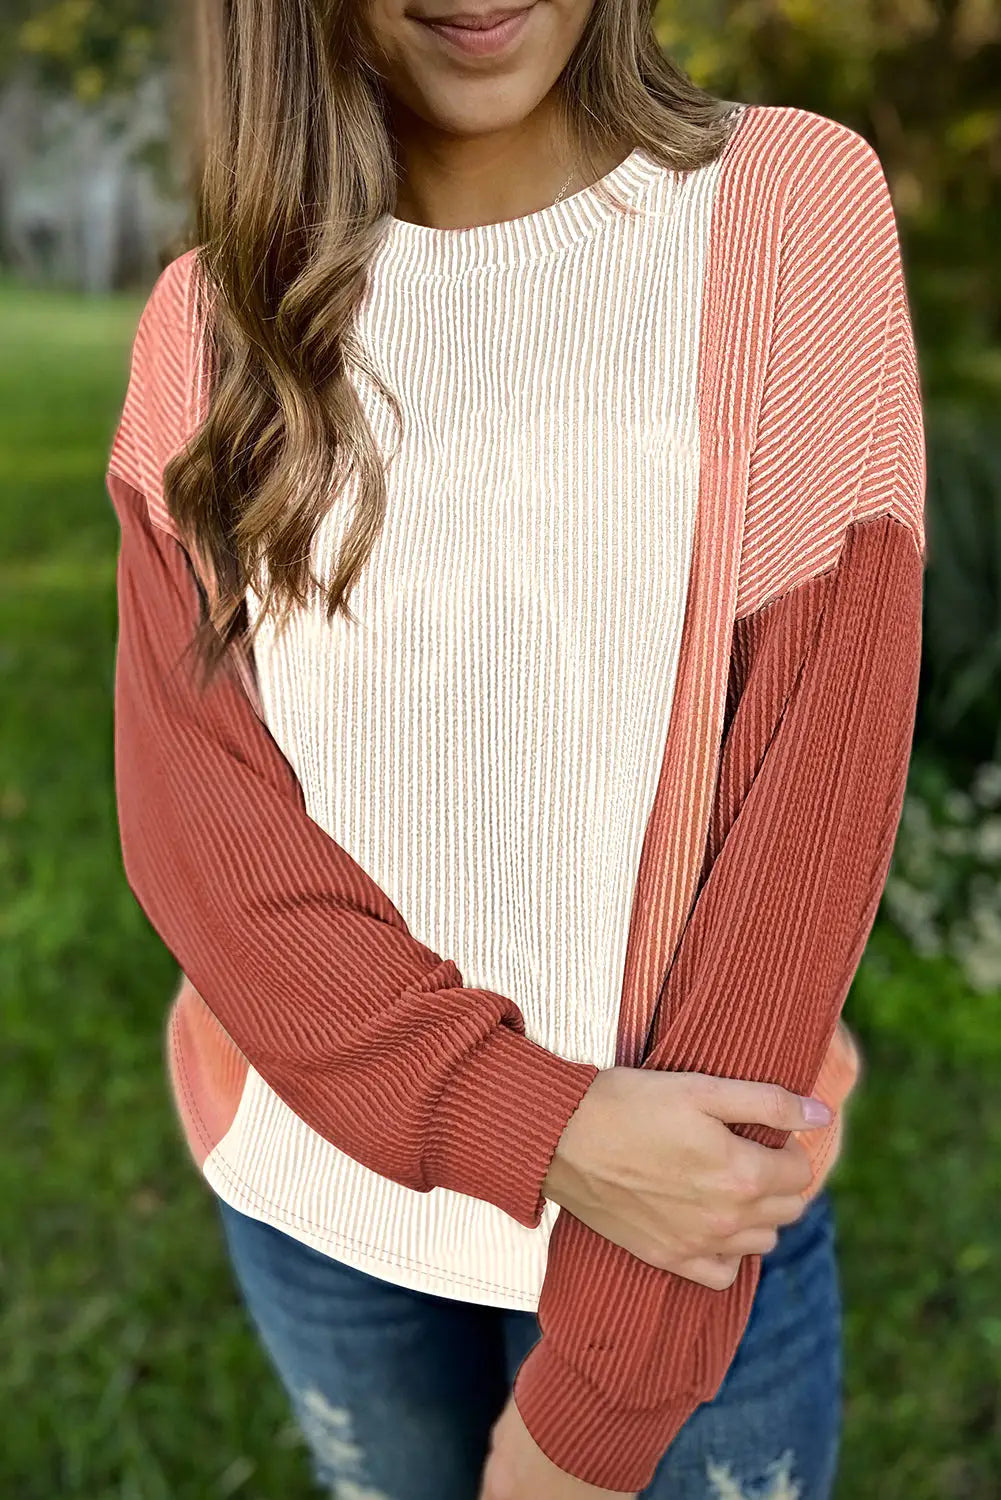 Black color block corded texture long sleeve top - apricot pink / s / 75% polyester + 20% viscose + 5% elastane - tops